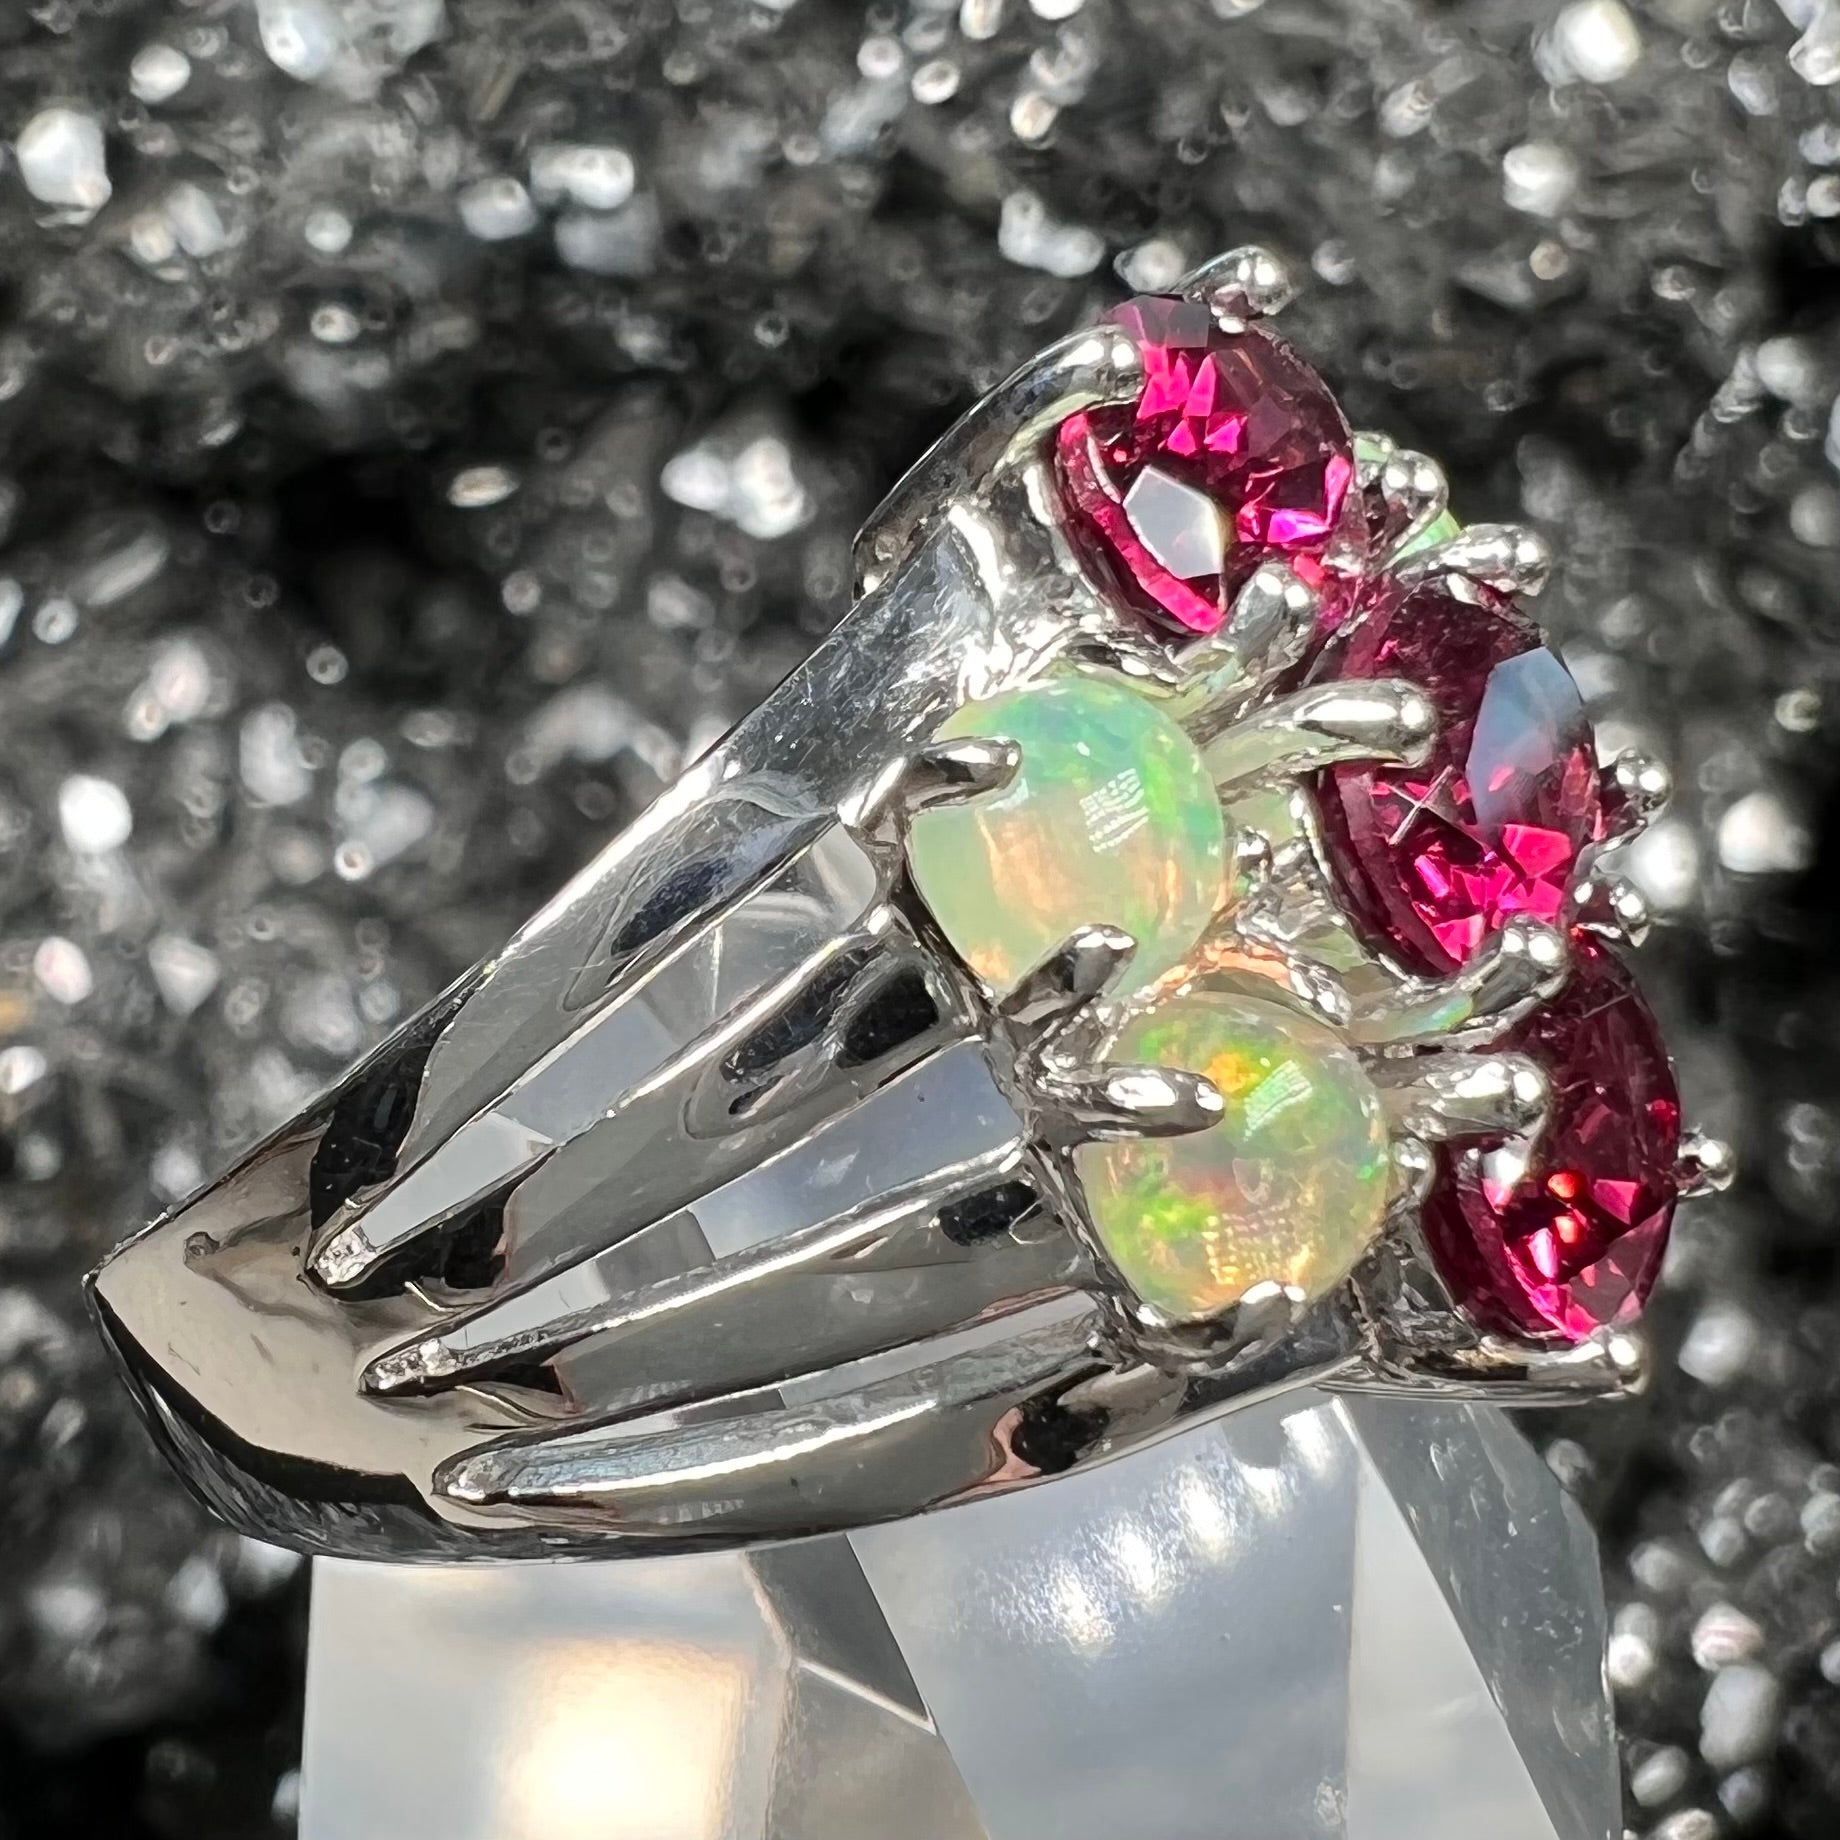 A sterling silver ring set with three oval cut rhodolite garnets and four round cabochon cut Ethiopian opals.